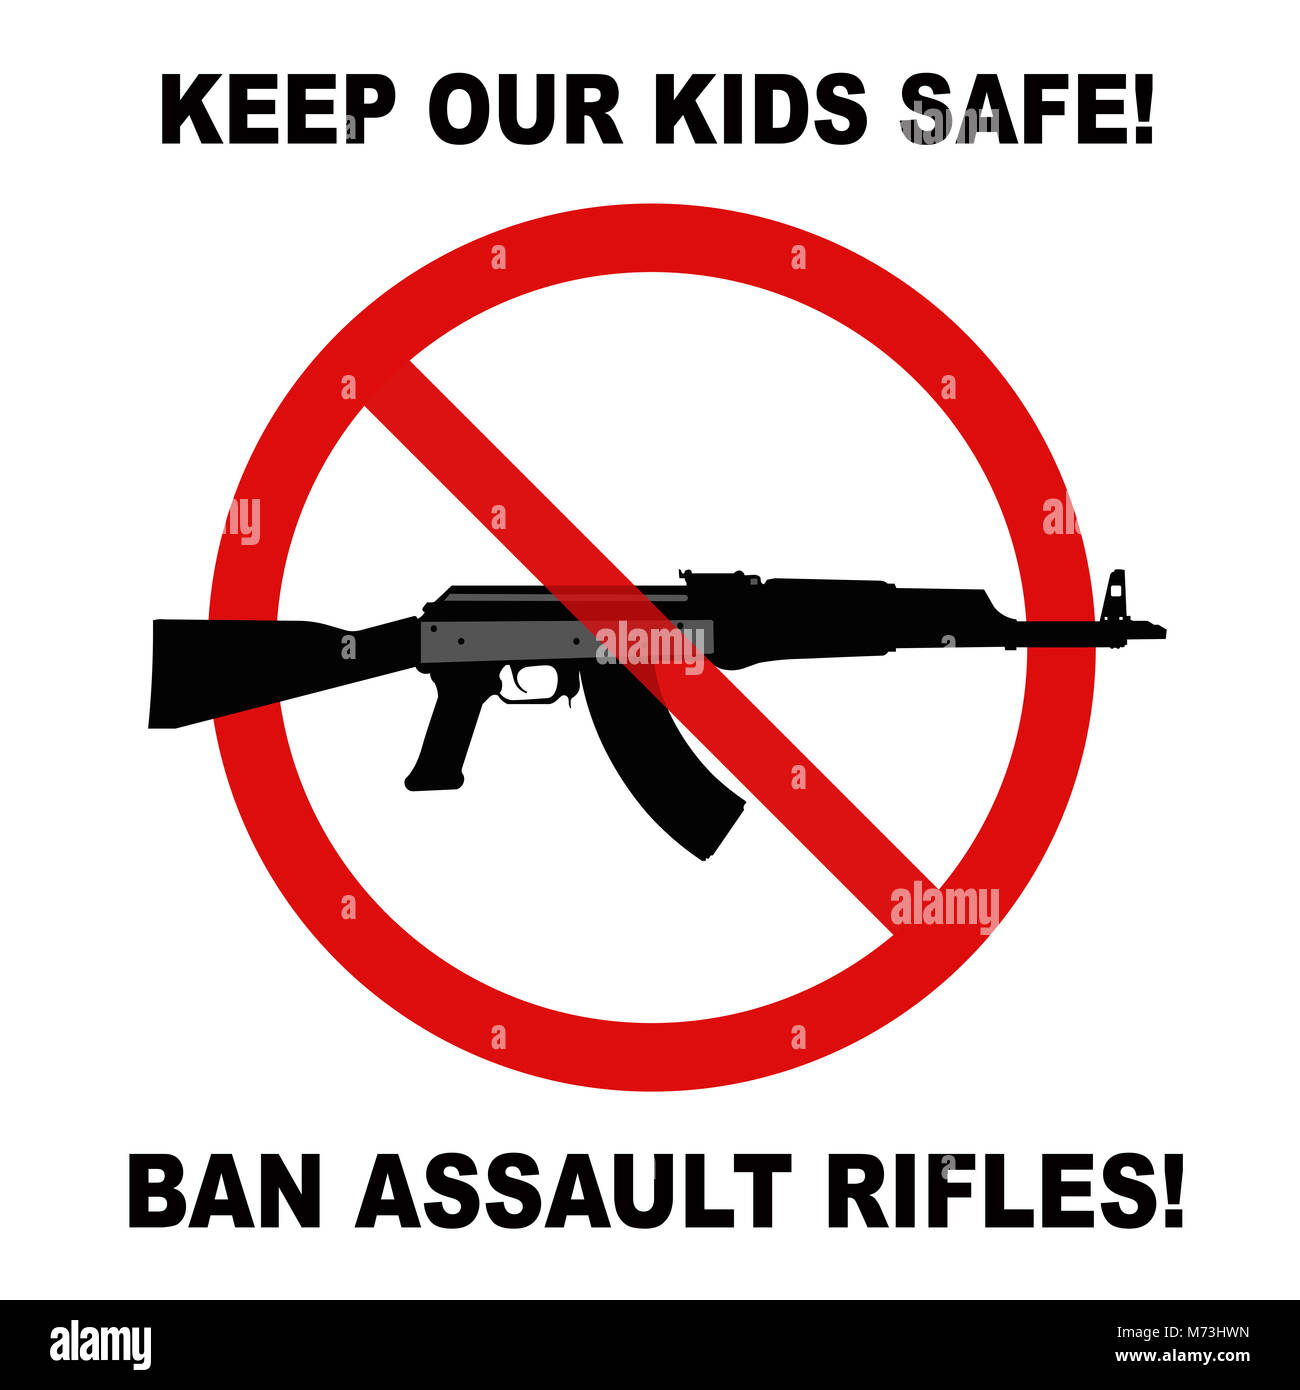 Keep our kids safe, ban assault rifles forbidden sign against white background Stock Photo